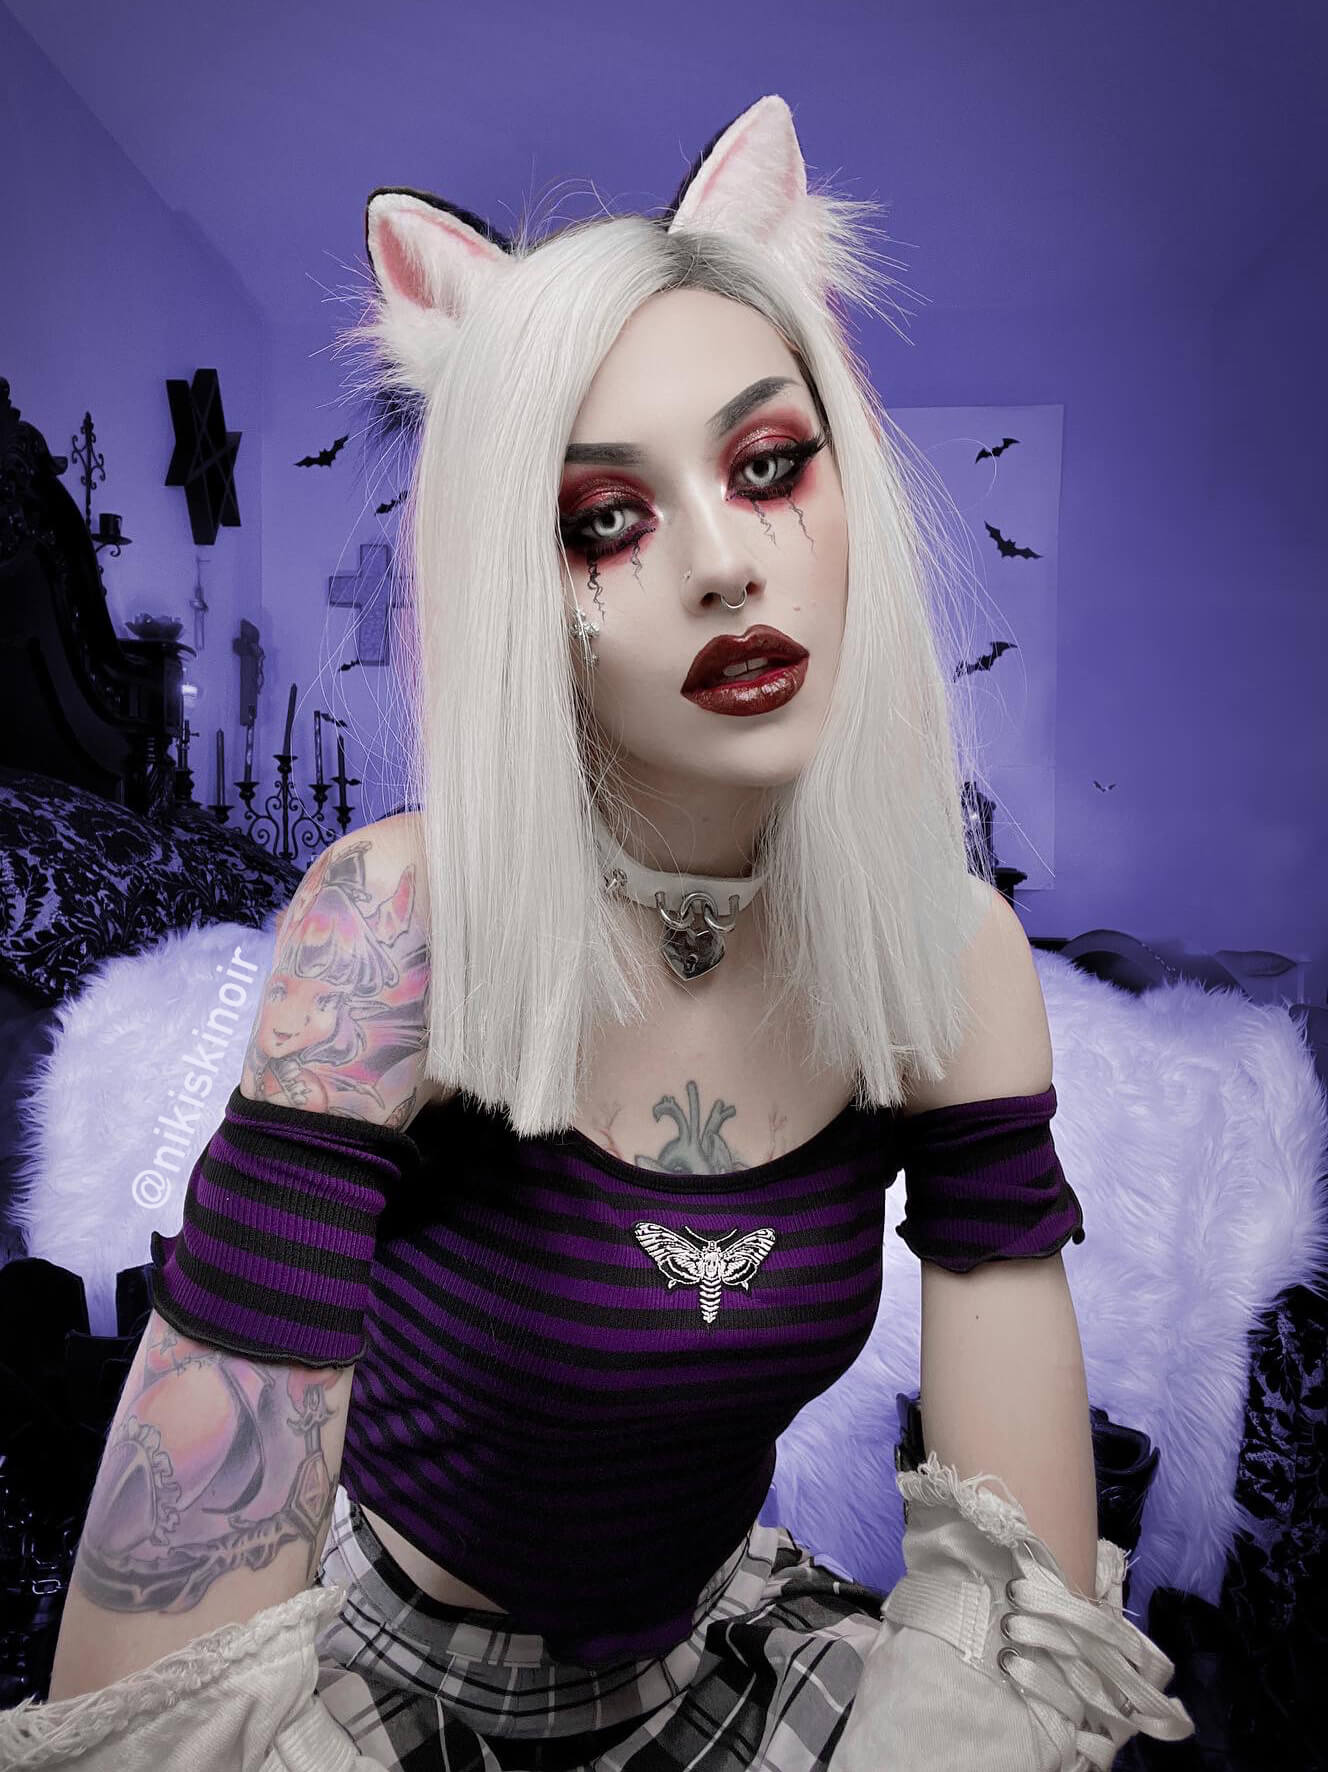 Pastel Goth Clothing | Pastel Goth Fashion & Outfits Tagged 